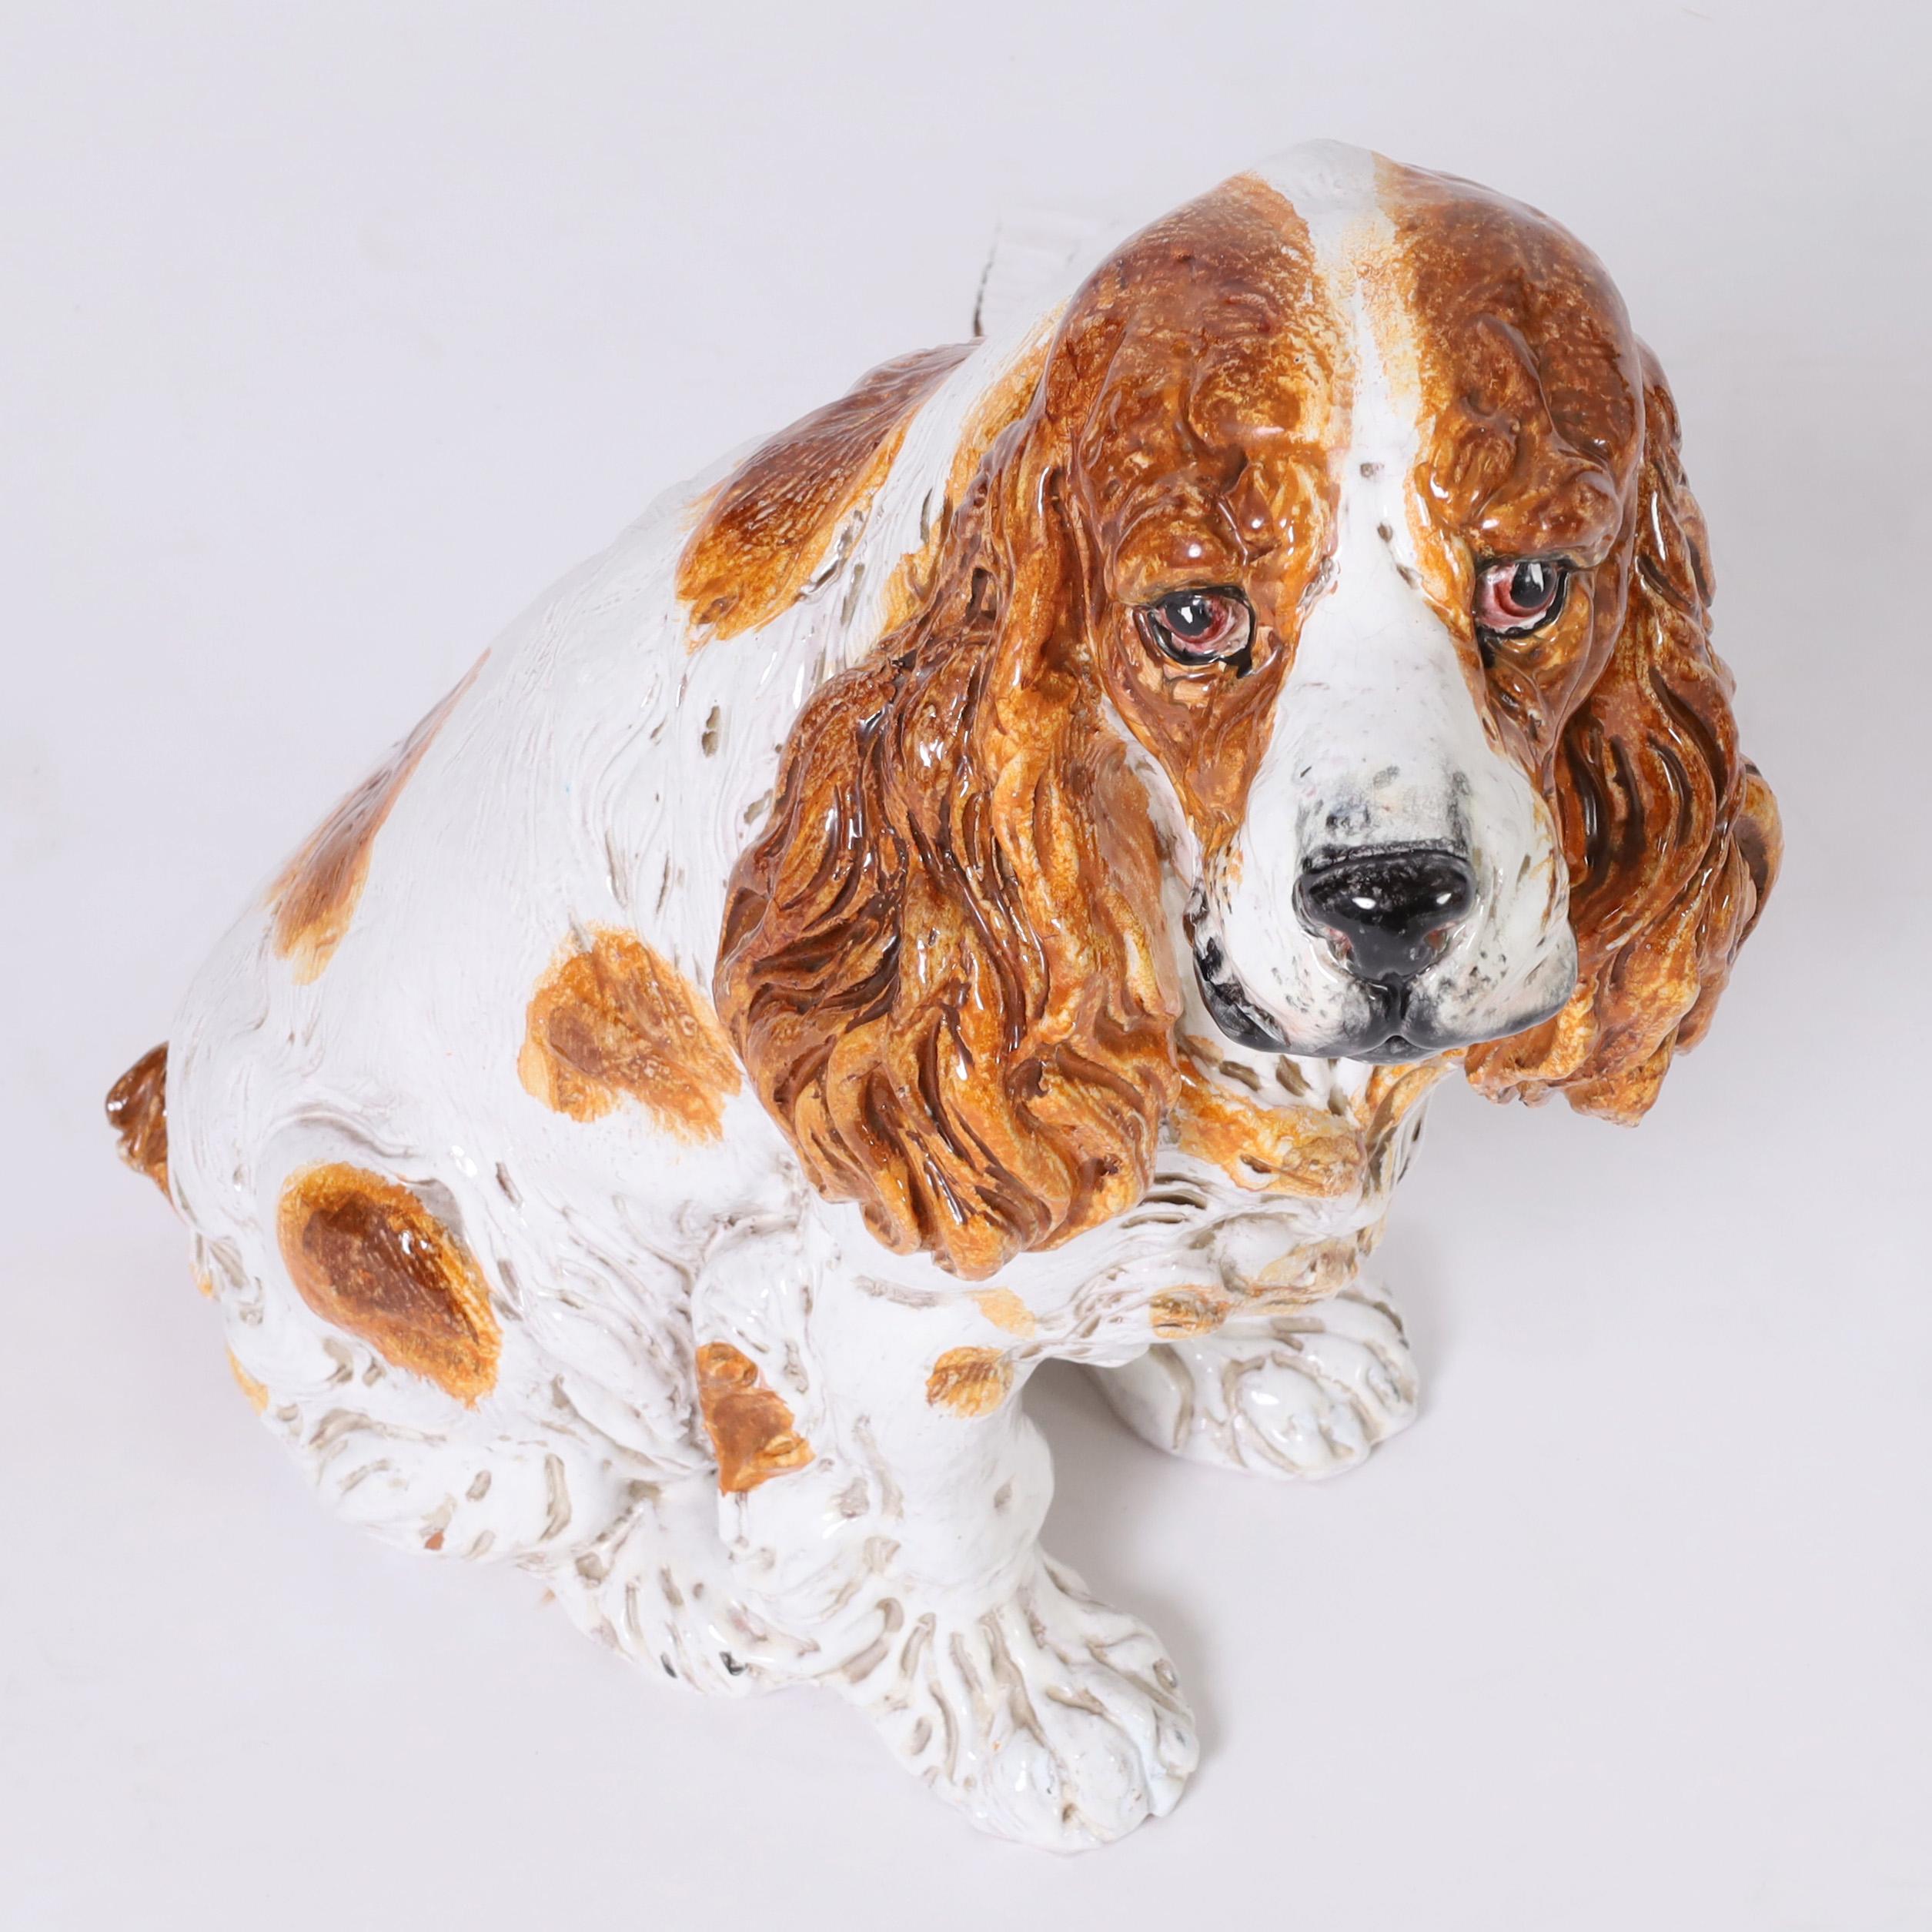 Charming Italian Cocker Spaniel sculpture crafted in terra cotta, hand decorated and glazed, complete with soulful expression.